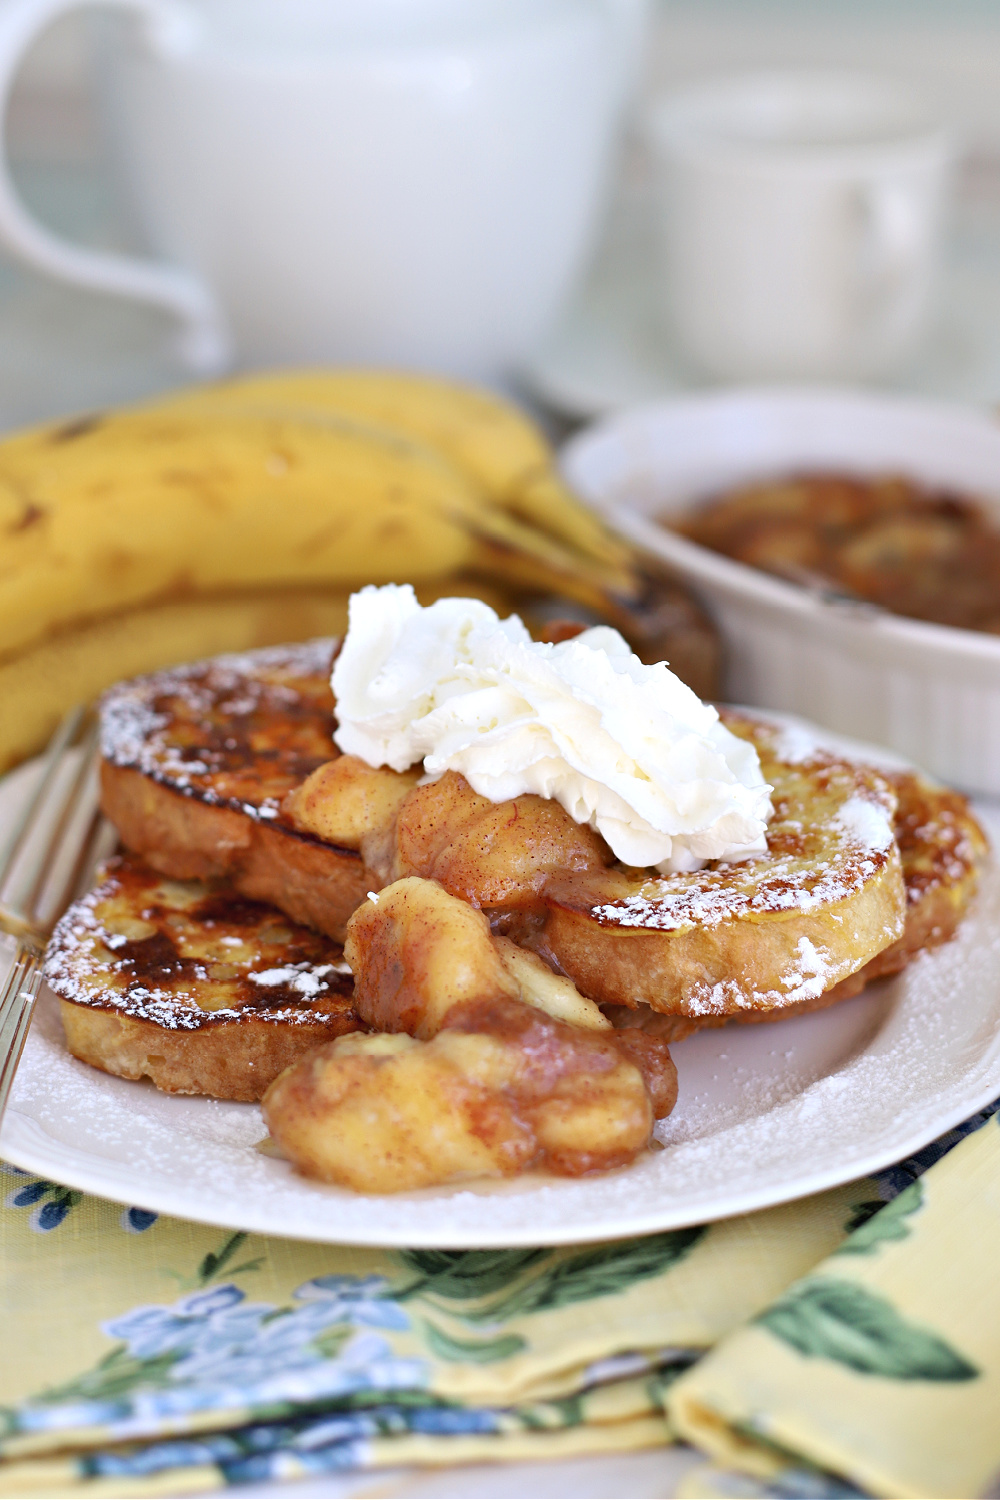 Sweet cinnamon and brown sugar sautéed bananas served on French toast, pancakes, topped with ice cream or just by themselves.